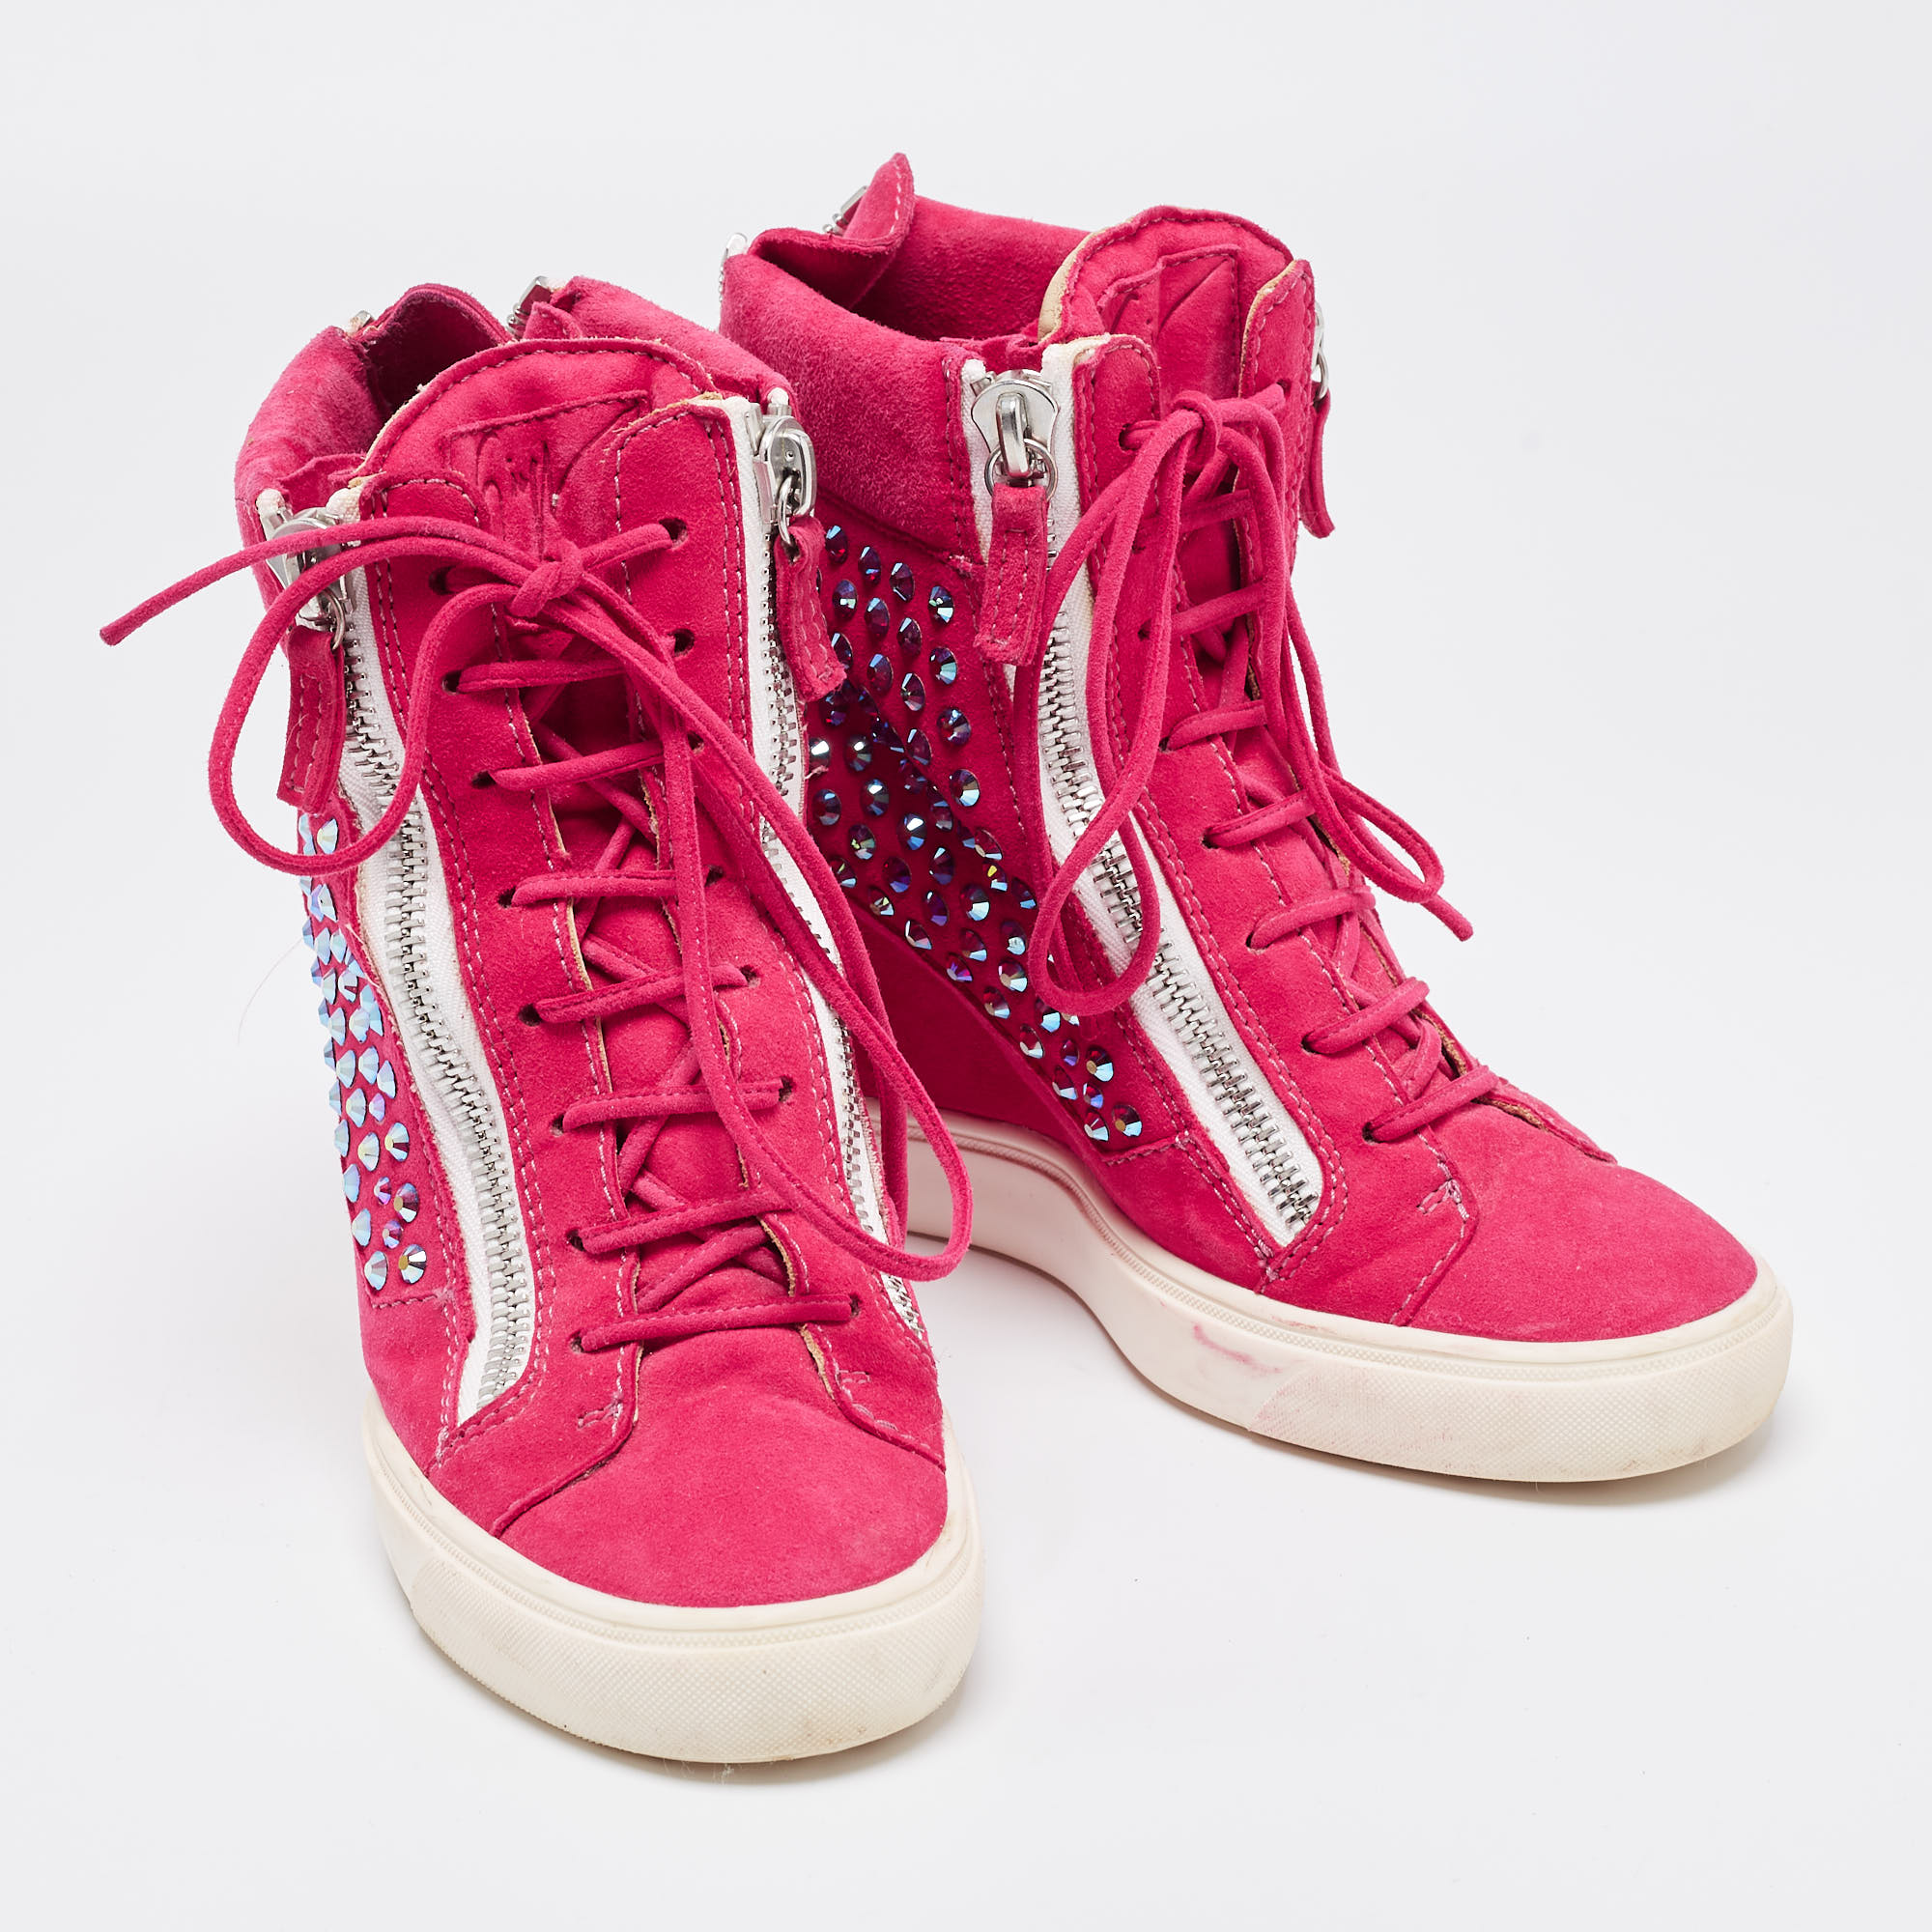 Giuseppe Zanotti Pink Suede Crystal Embellished Wedge Sneakers Size 39